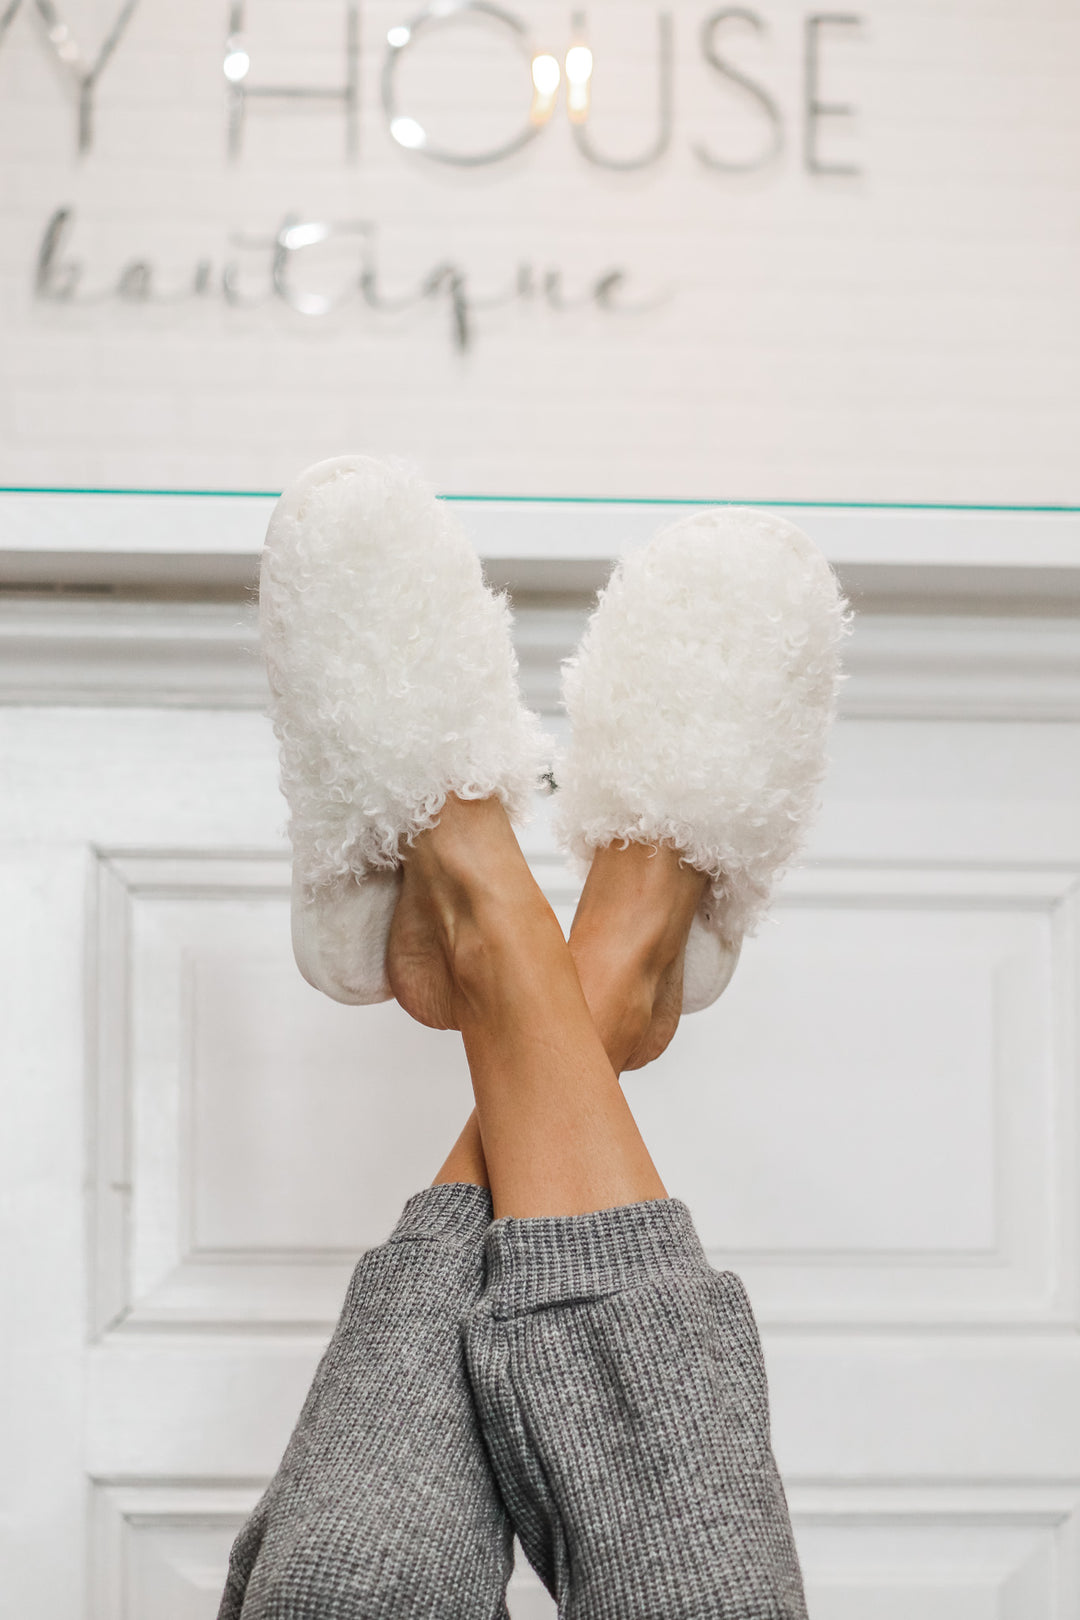 A photo of a woman wearing white furry slippers.